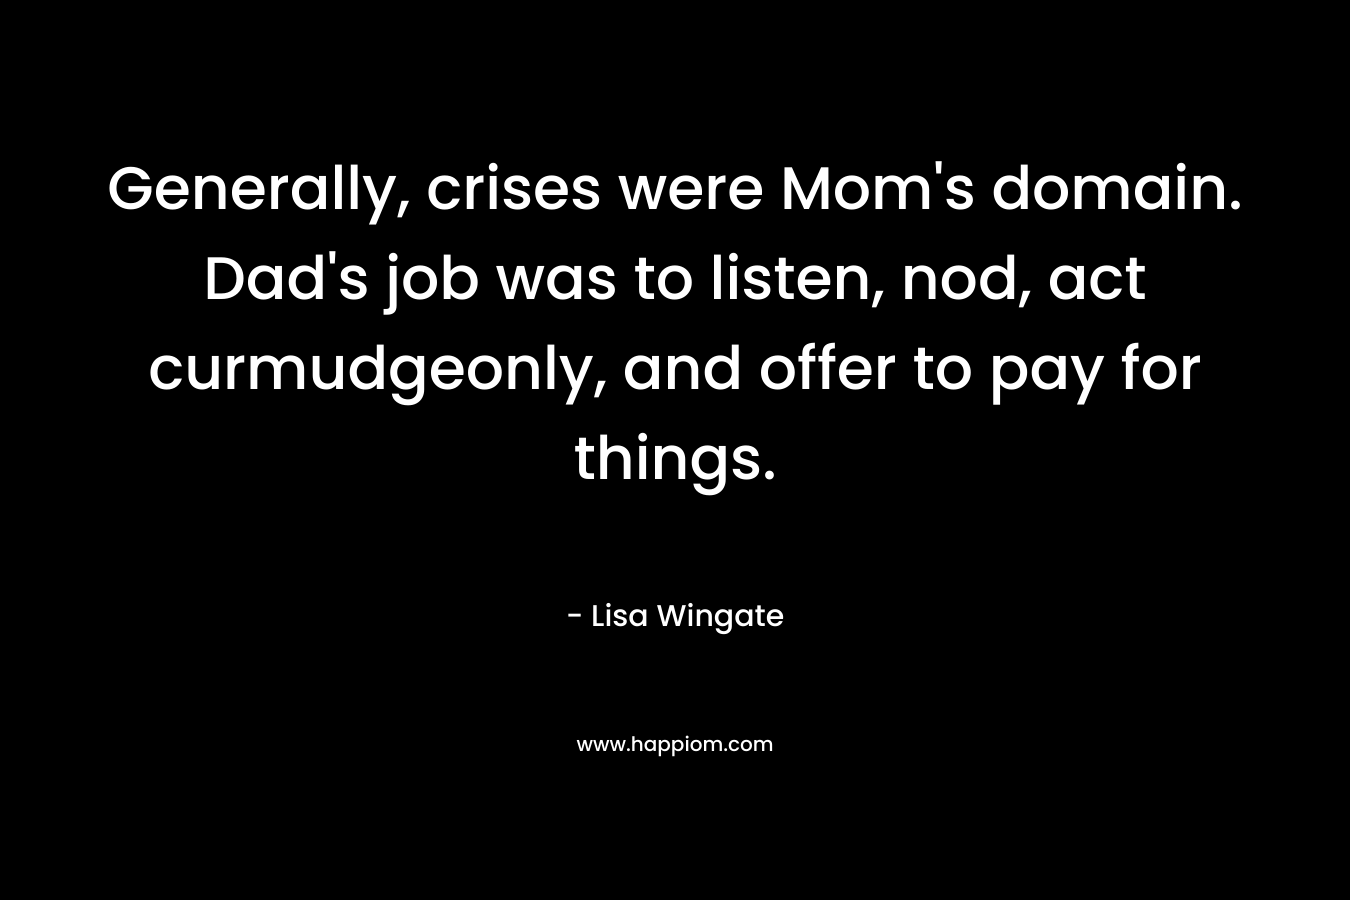 Generally, crises were Mom’s domain. Dad’s job was to listen, nod, act curmudgeonly, and offer to pay for things. – Lisa Wingate